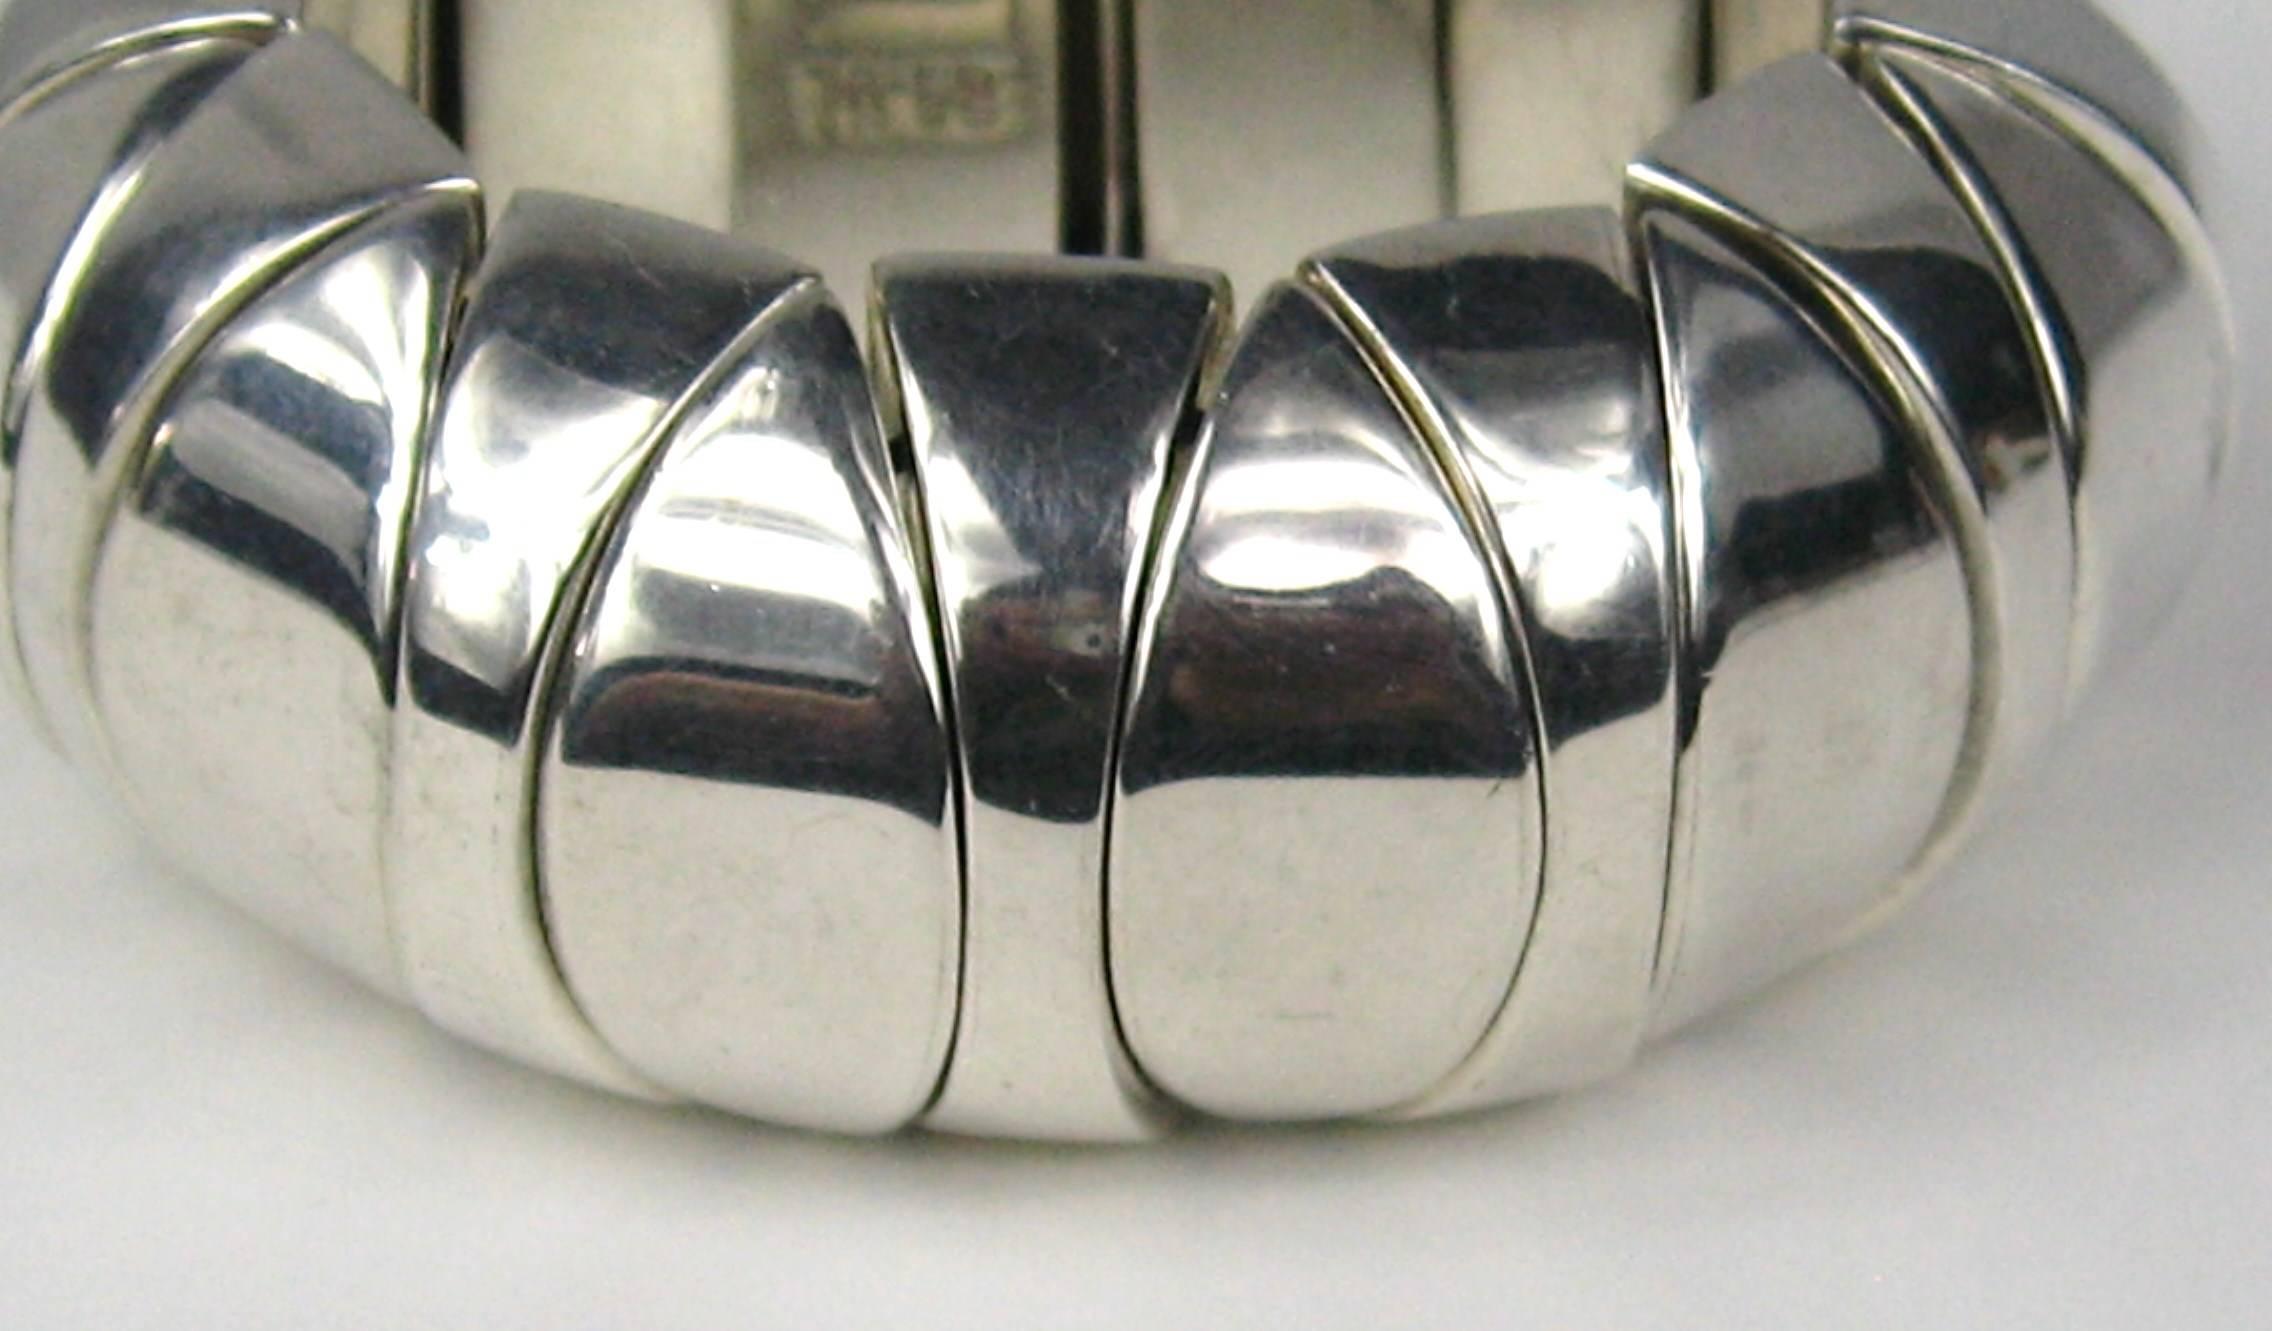 large scale Mexican sterling silver bracelet. Strung together with elastic making it an easy fit for a many size wrists. Measures 1.1 inches wide, Hallmarked inside bracelet. This is out of a massive collection of Contemporary Fashion as well as 